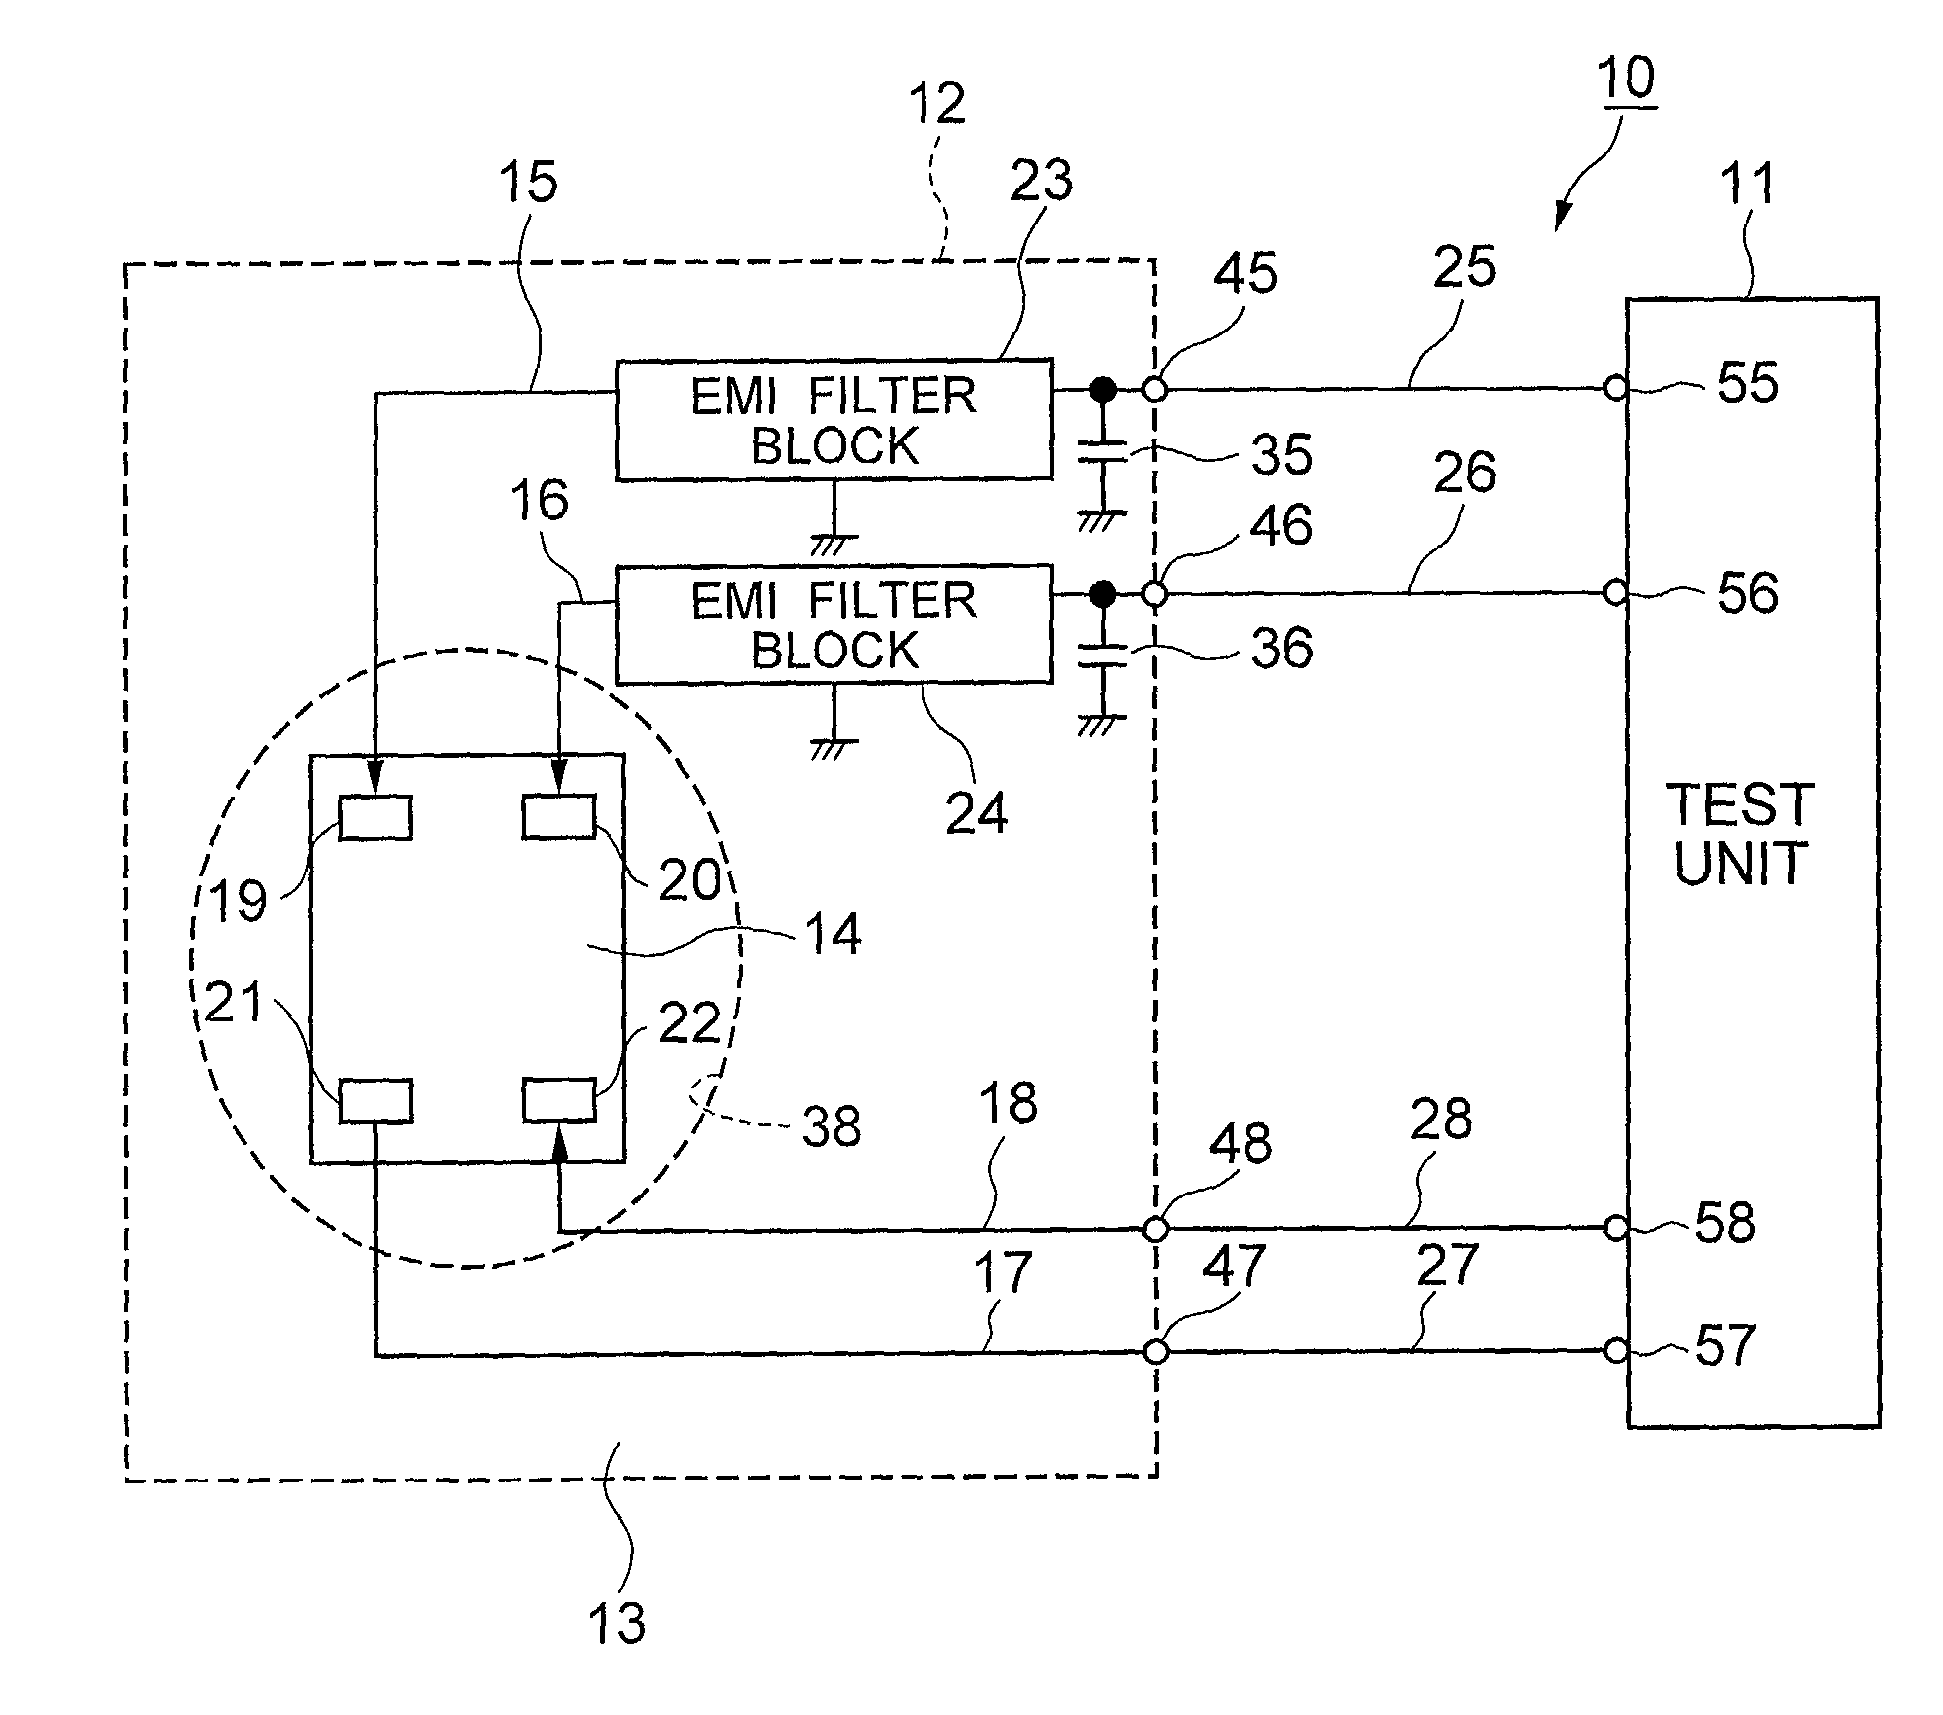 Probe card for testing an LSI operating on two power source voltages